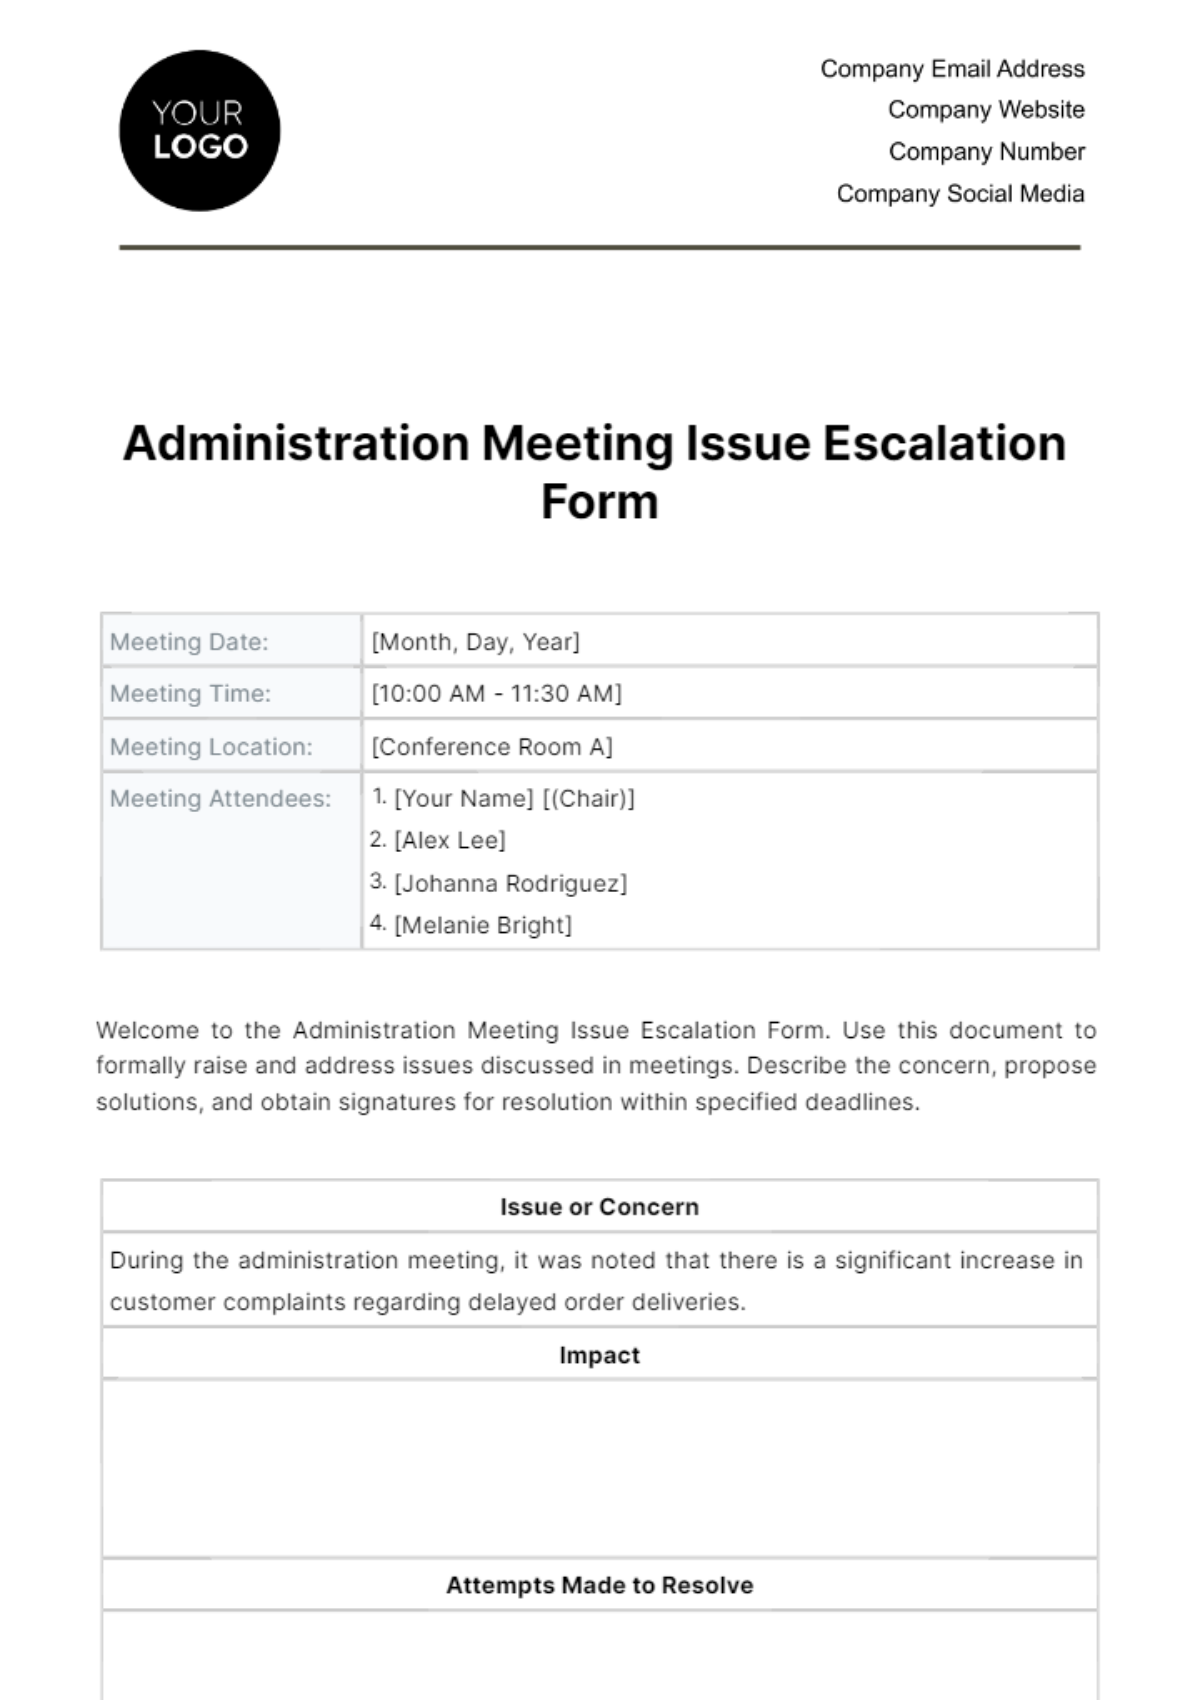 Free Administration Meeting Issue Escalation Form Template